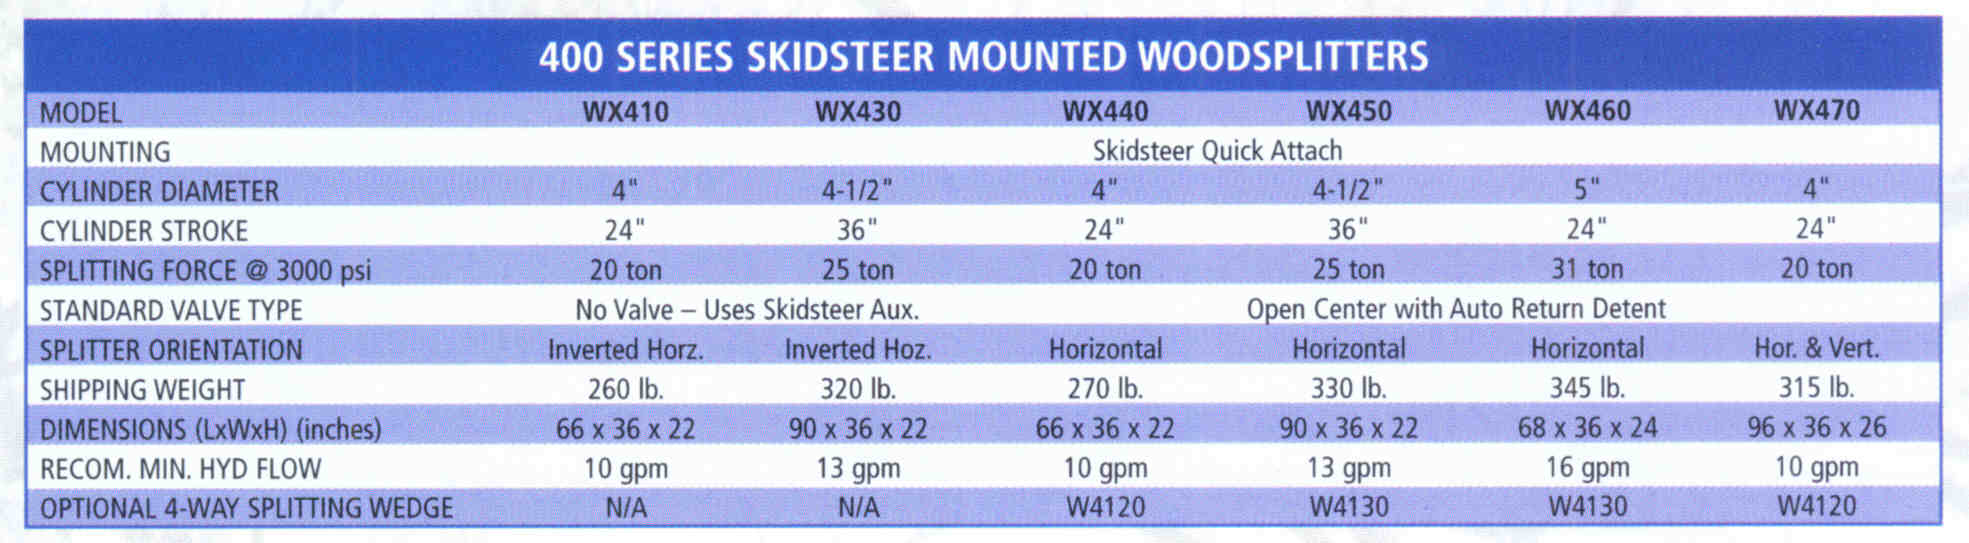 Specifications - Skid Steer Mounted Models